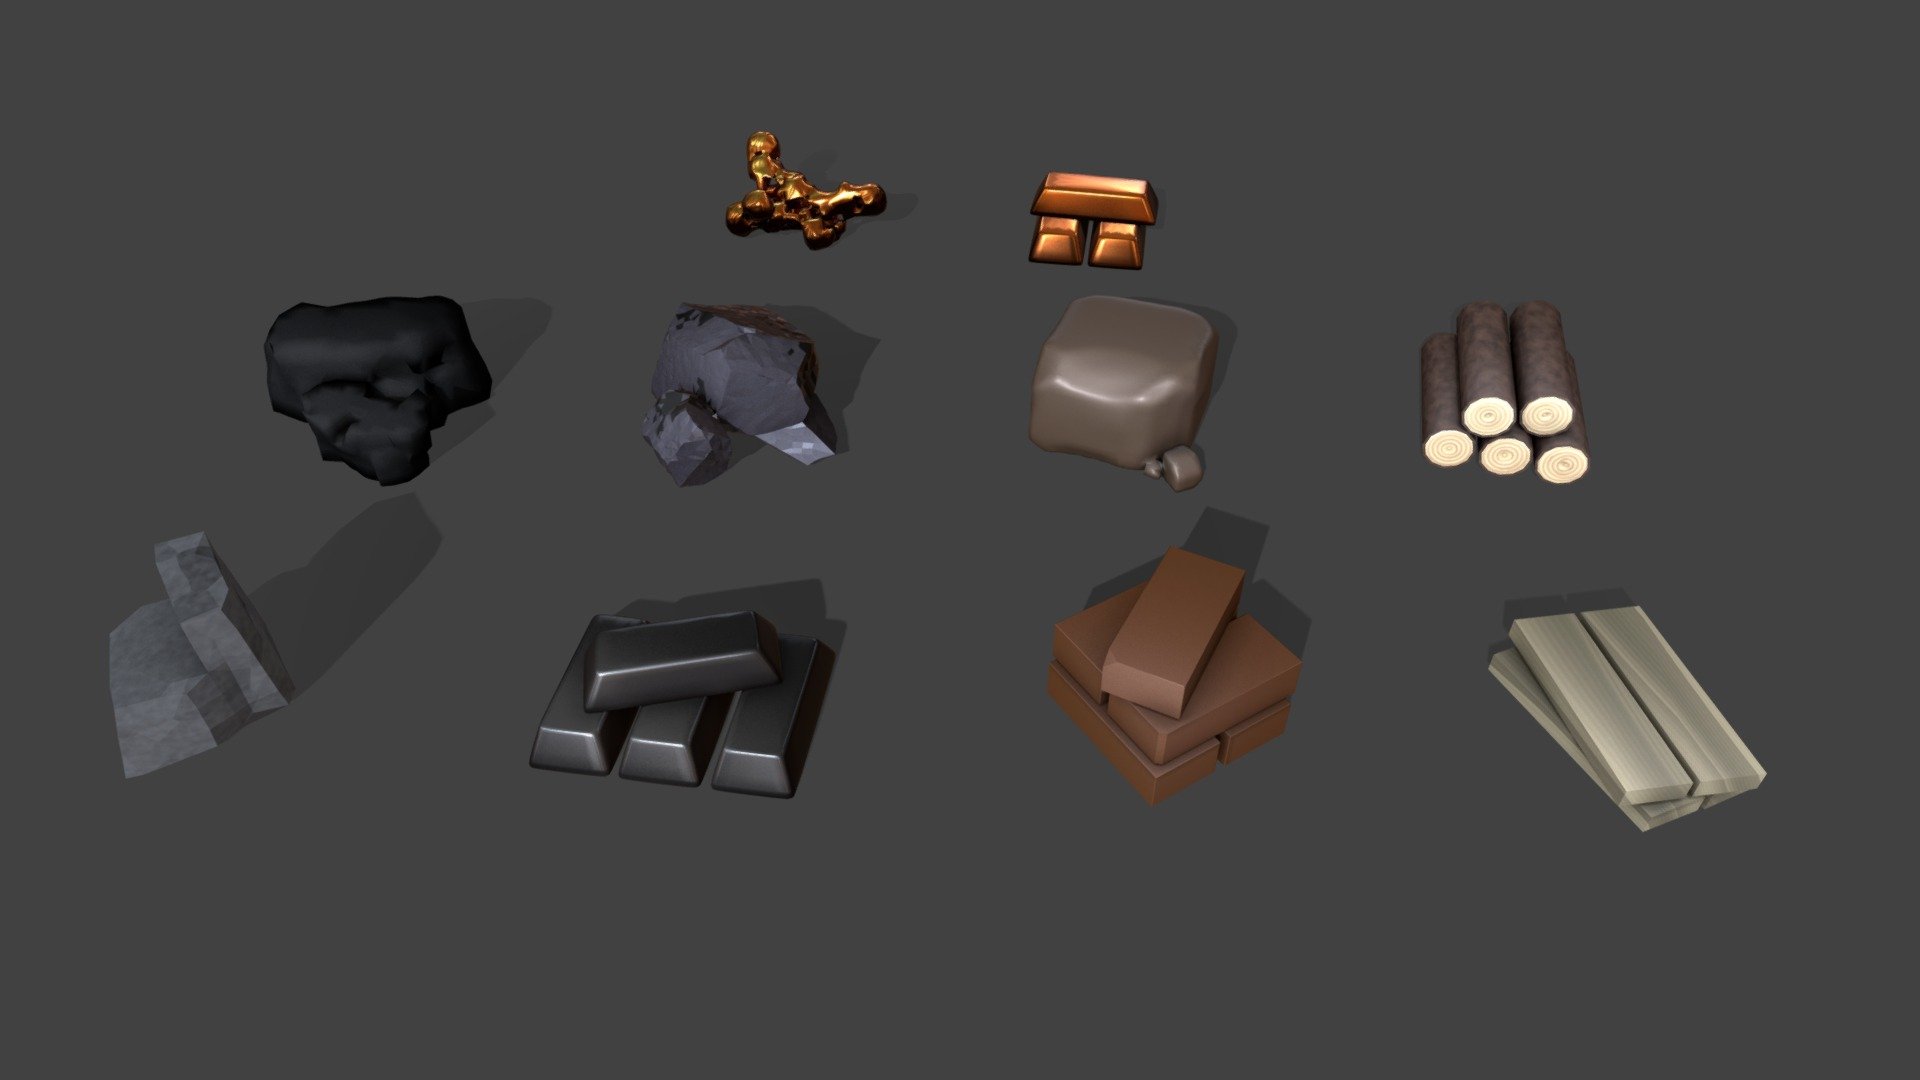 Raw materials. Each model has 1024 x 1024 size texturemap, which is a combined bake, and models are shown here with just the one texture applied.
Coal,Stone,iron ore, Iron Ignot, clay, bricks, wood, timber, gold, and gold ignot 3d model